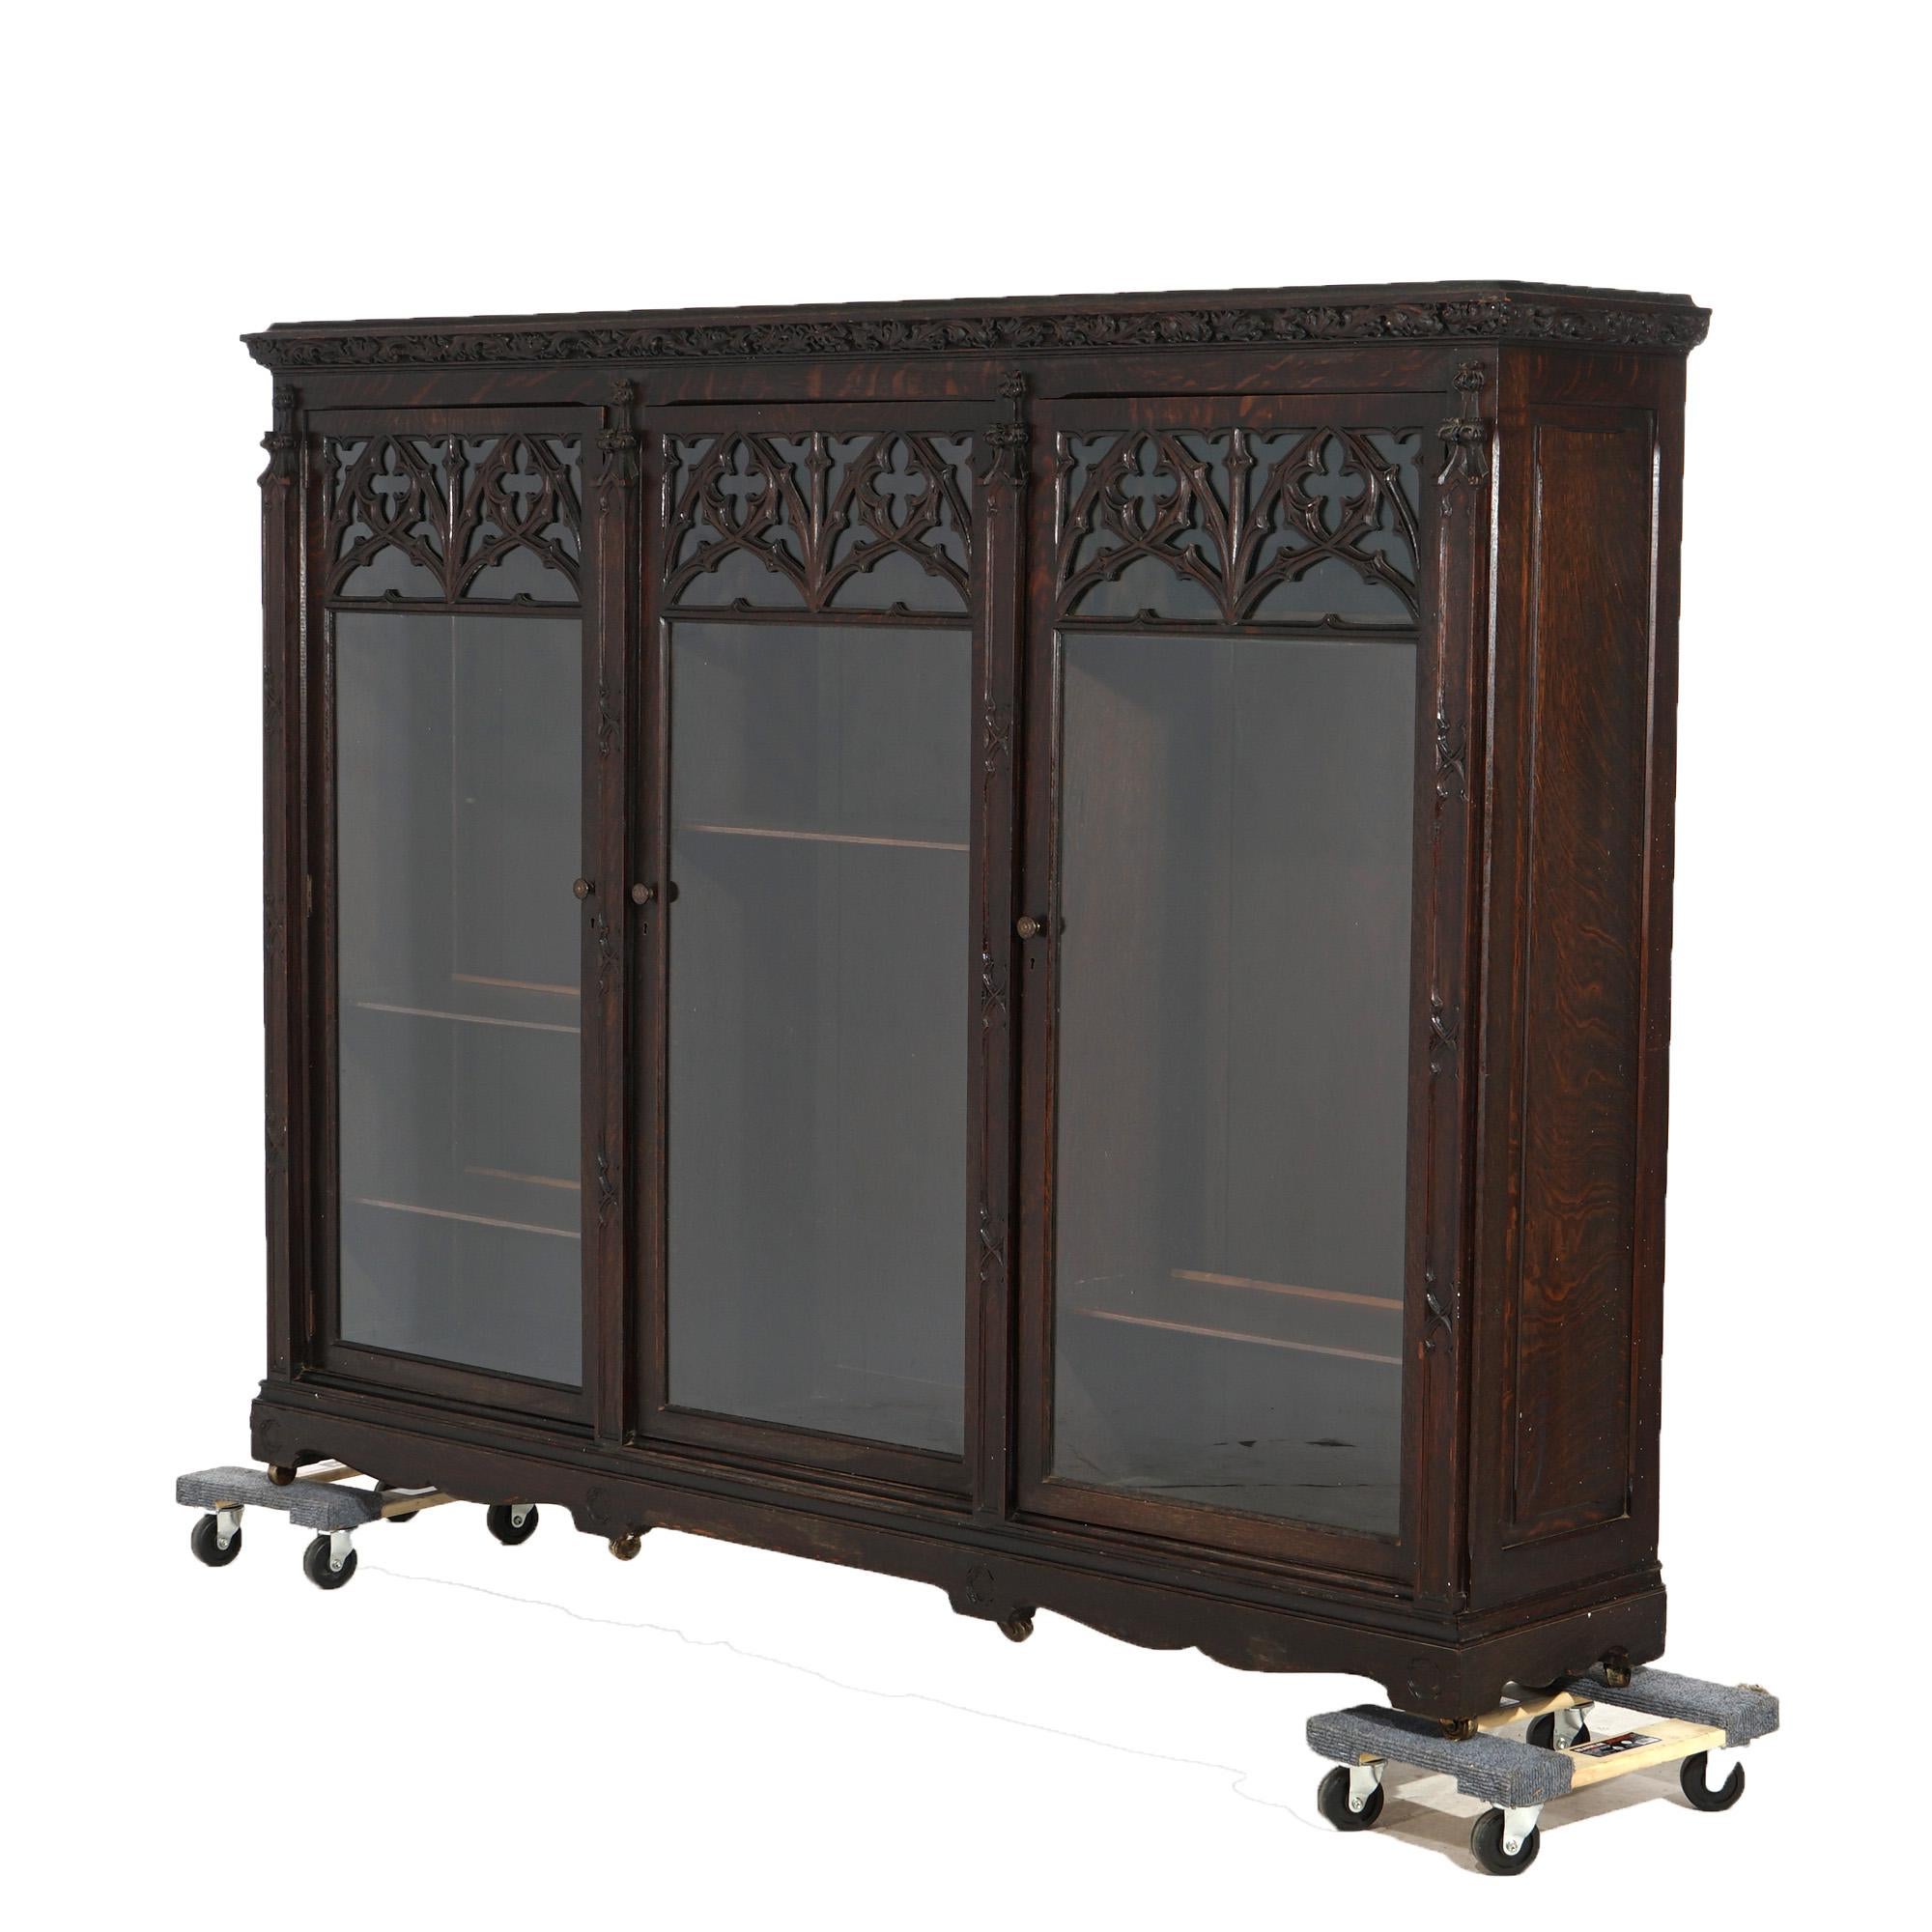 An antique Gothic Revival bookcase offers deeply striated quarter sawn oak construction with deeply carved acanthus frieze surmounting case having three glass doors with carved quatrefoil tracery elements and opening to divided shelved interior;